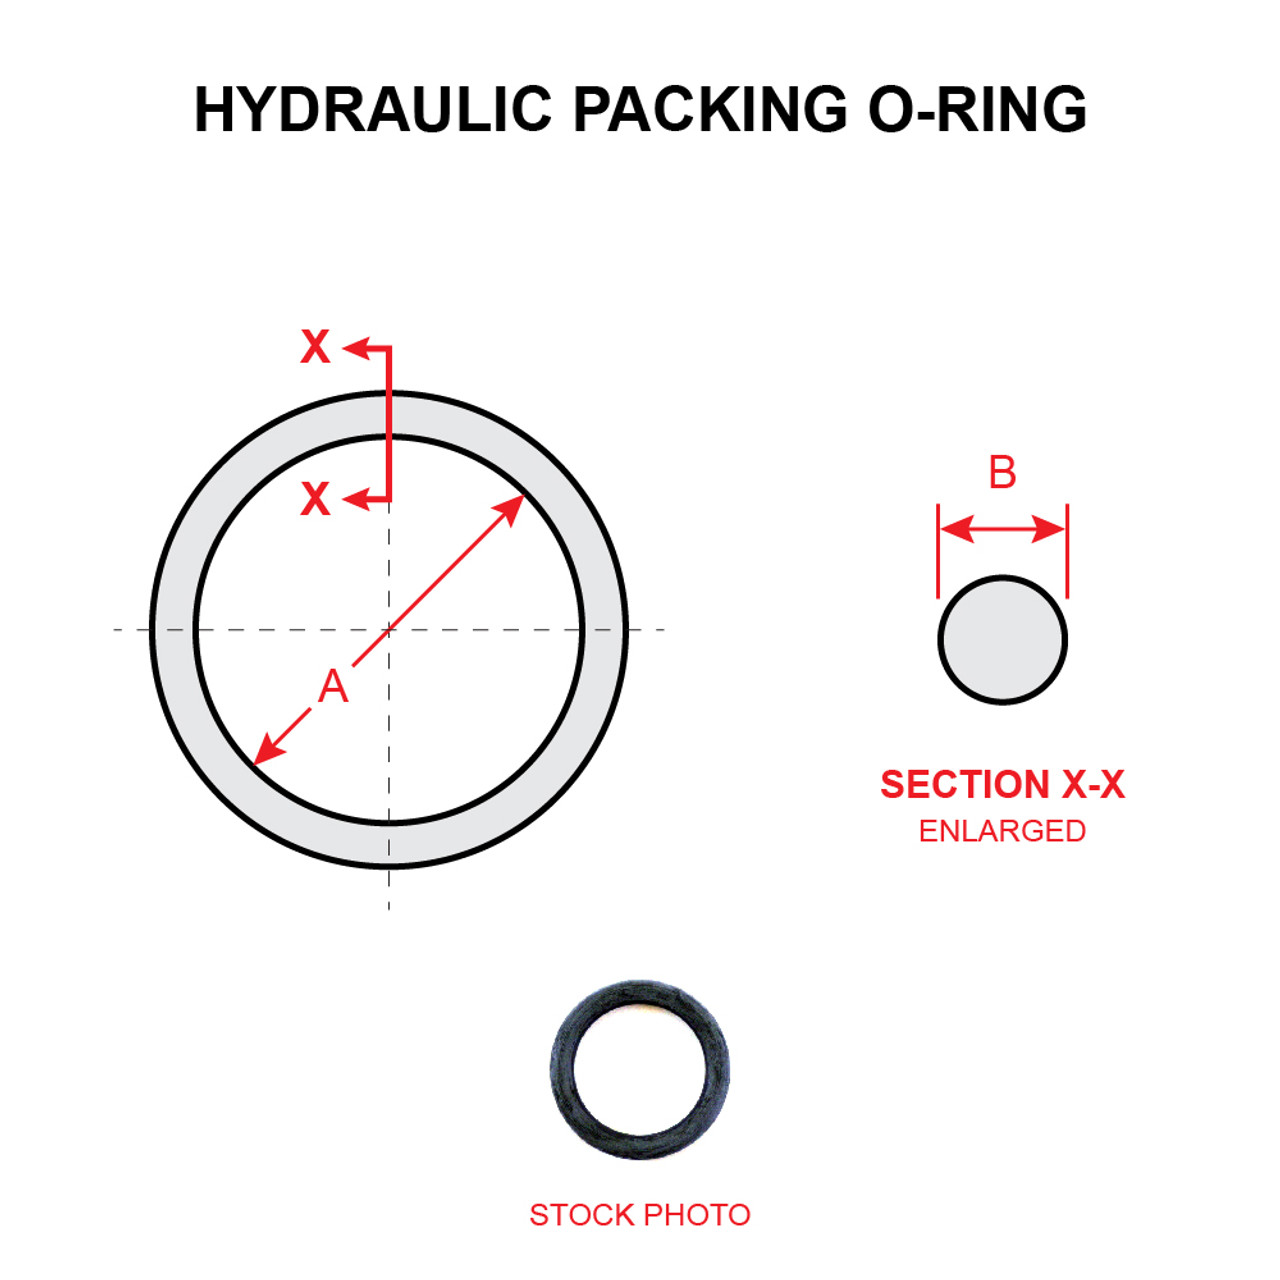 MS28775-016   HYDRAULIC PACKING O-RING